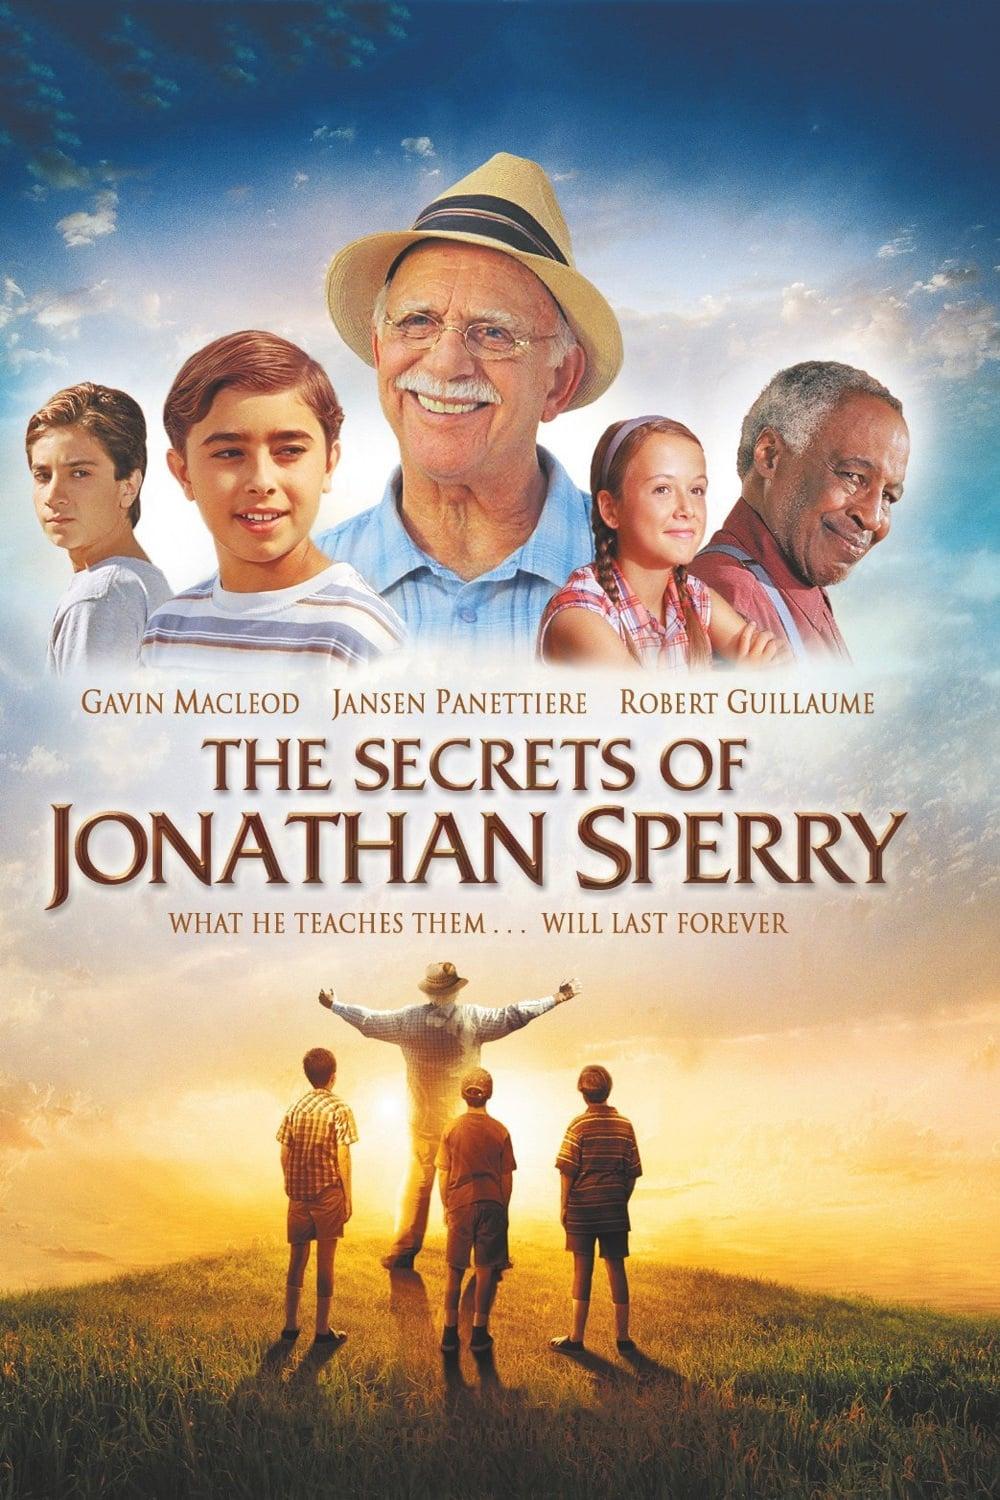 The Secrets of Jonathan Sperry poster